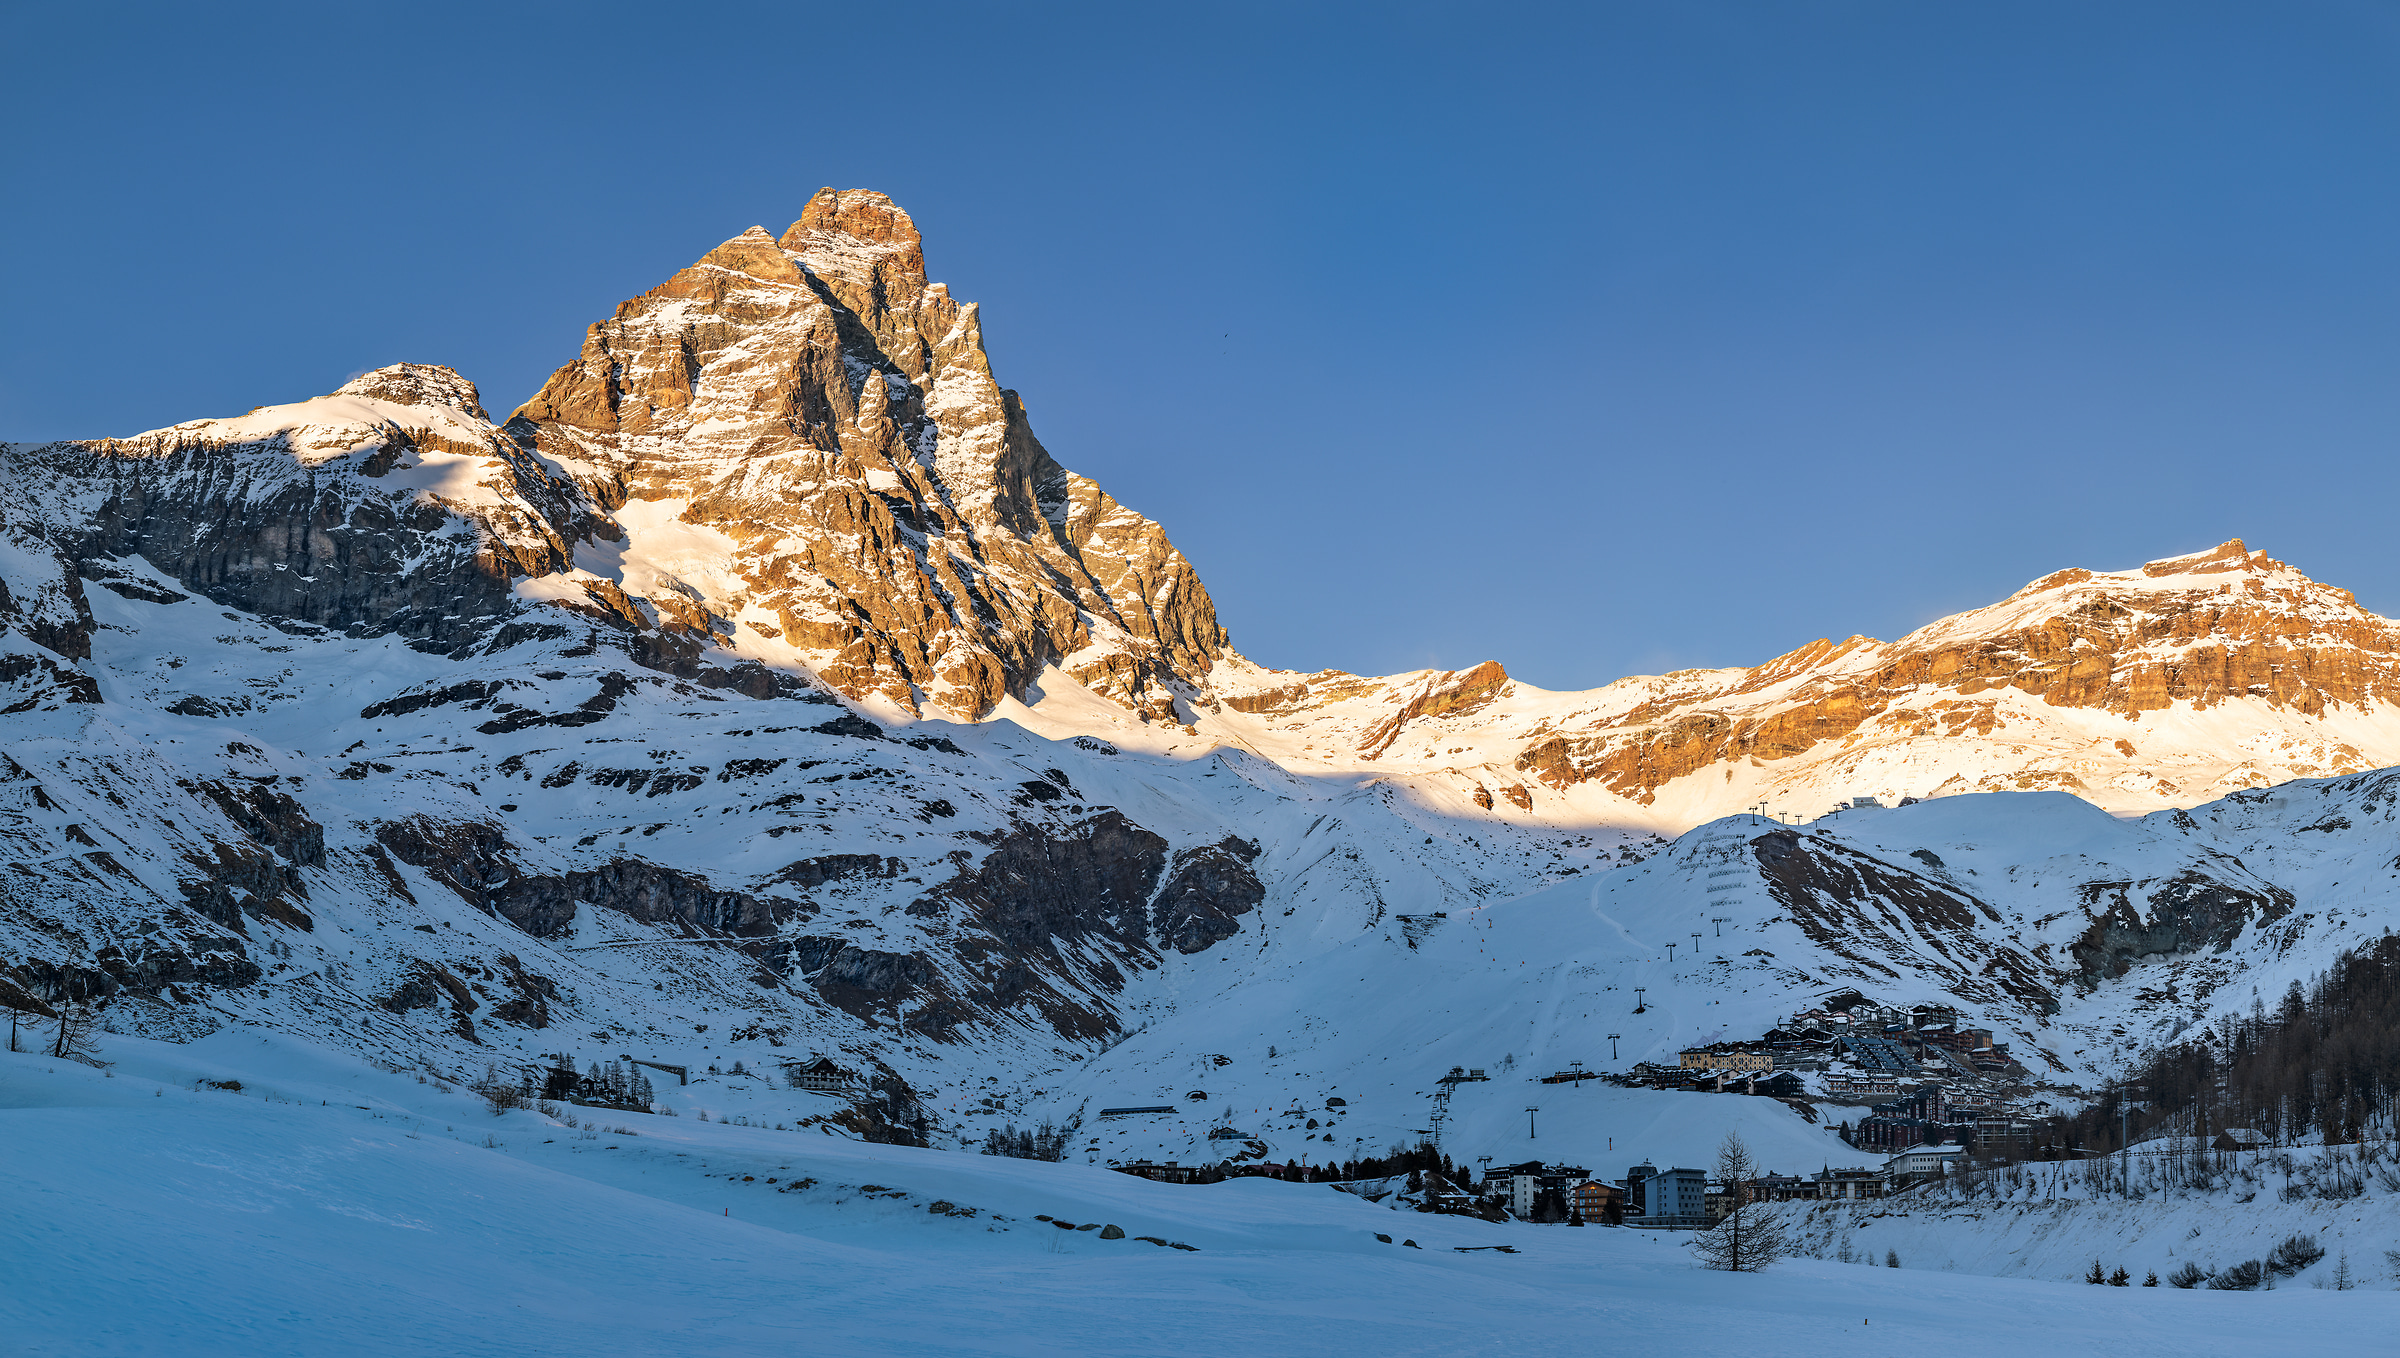 439 megapixels! A very high resolution, large-format wall mural photo of the Matterhorn; landscape photograph created by Duilio Fiorille in Breuil Cervinia, Valtournenche, Valle d'Aosta, Italy